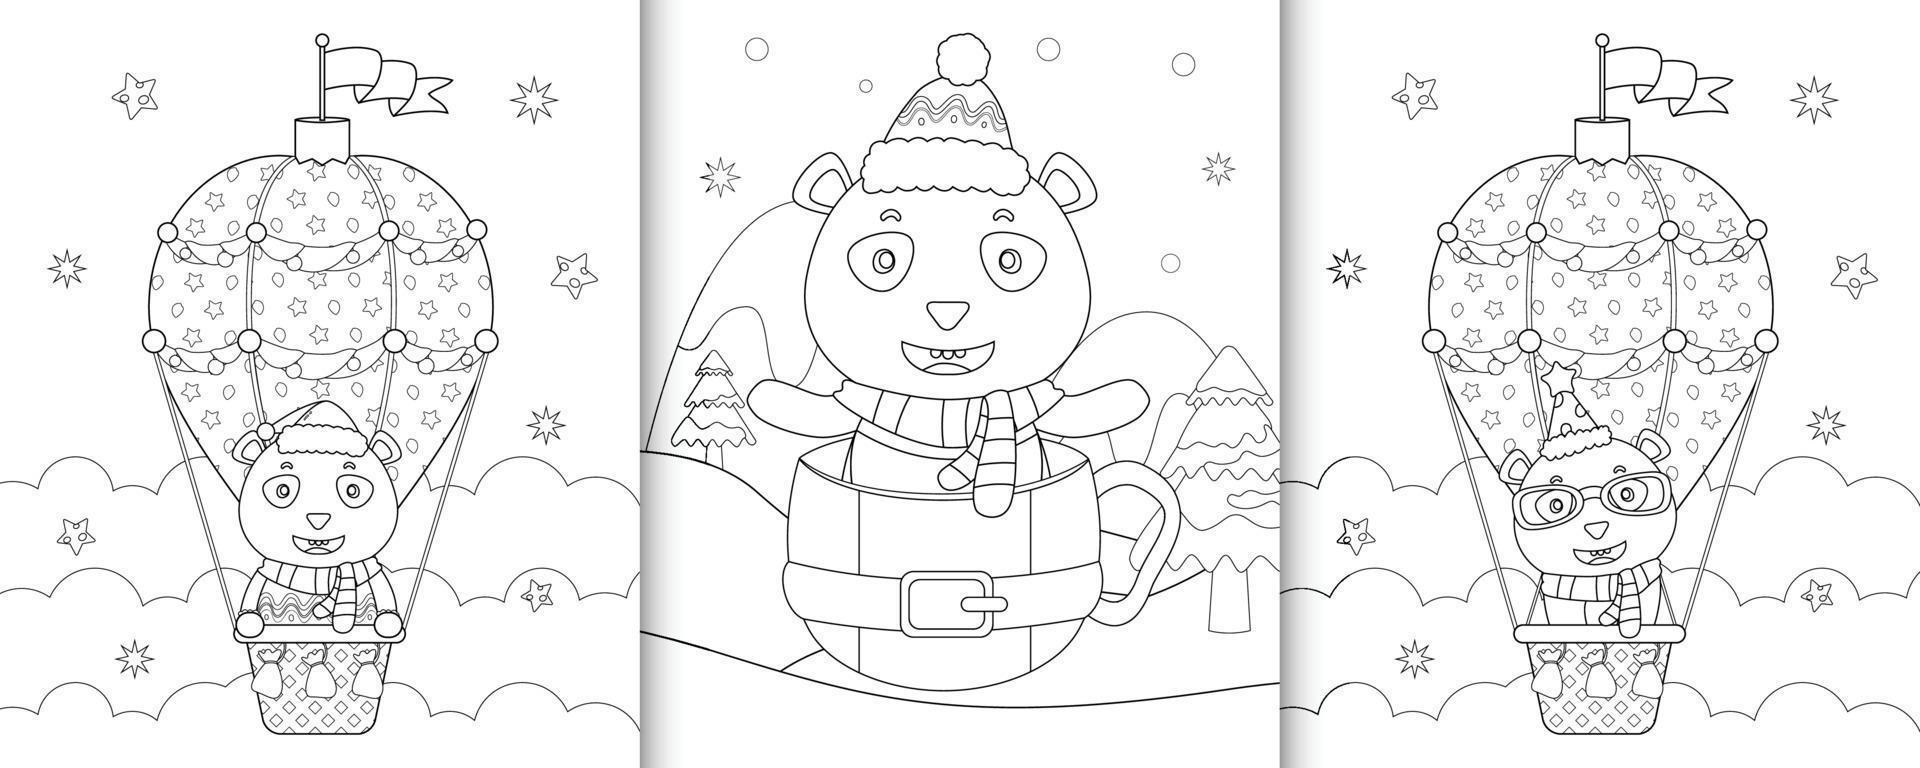 coloring book with cute panda christmas characters vector